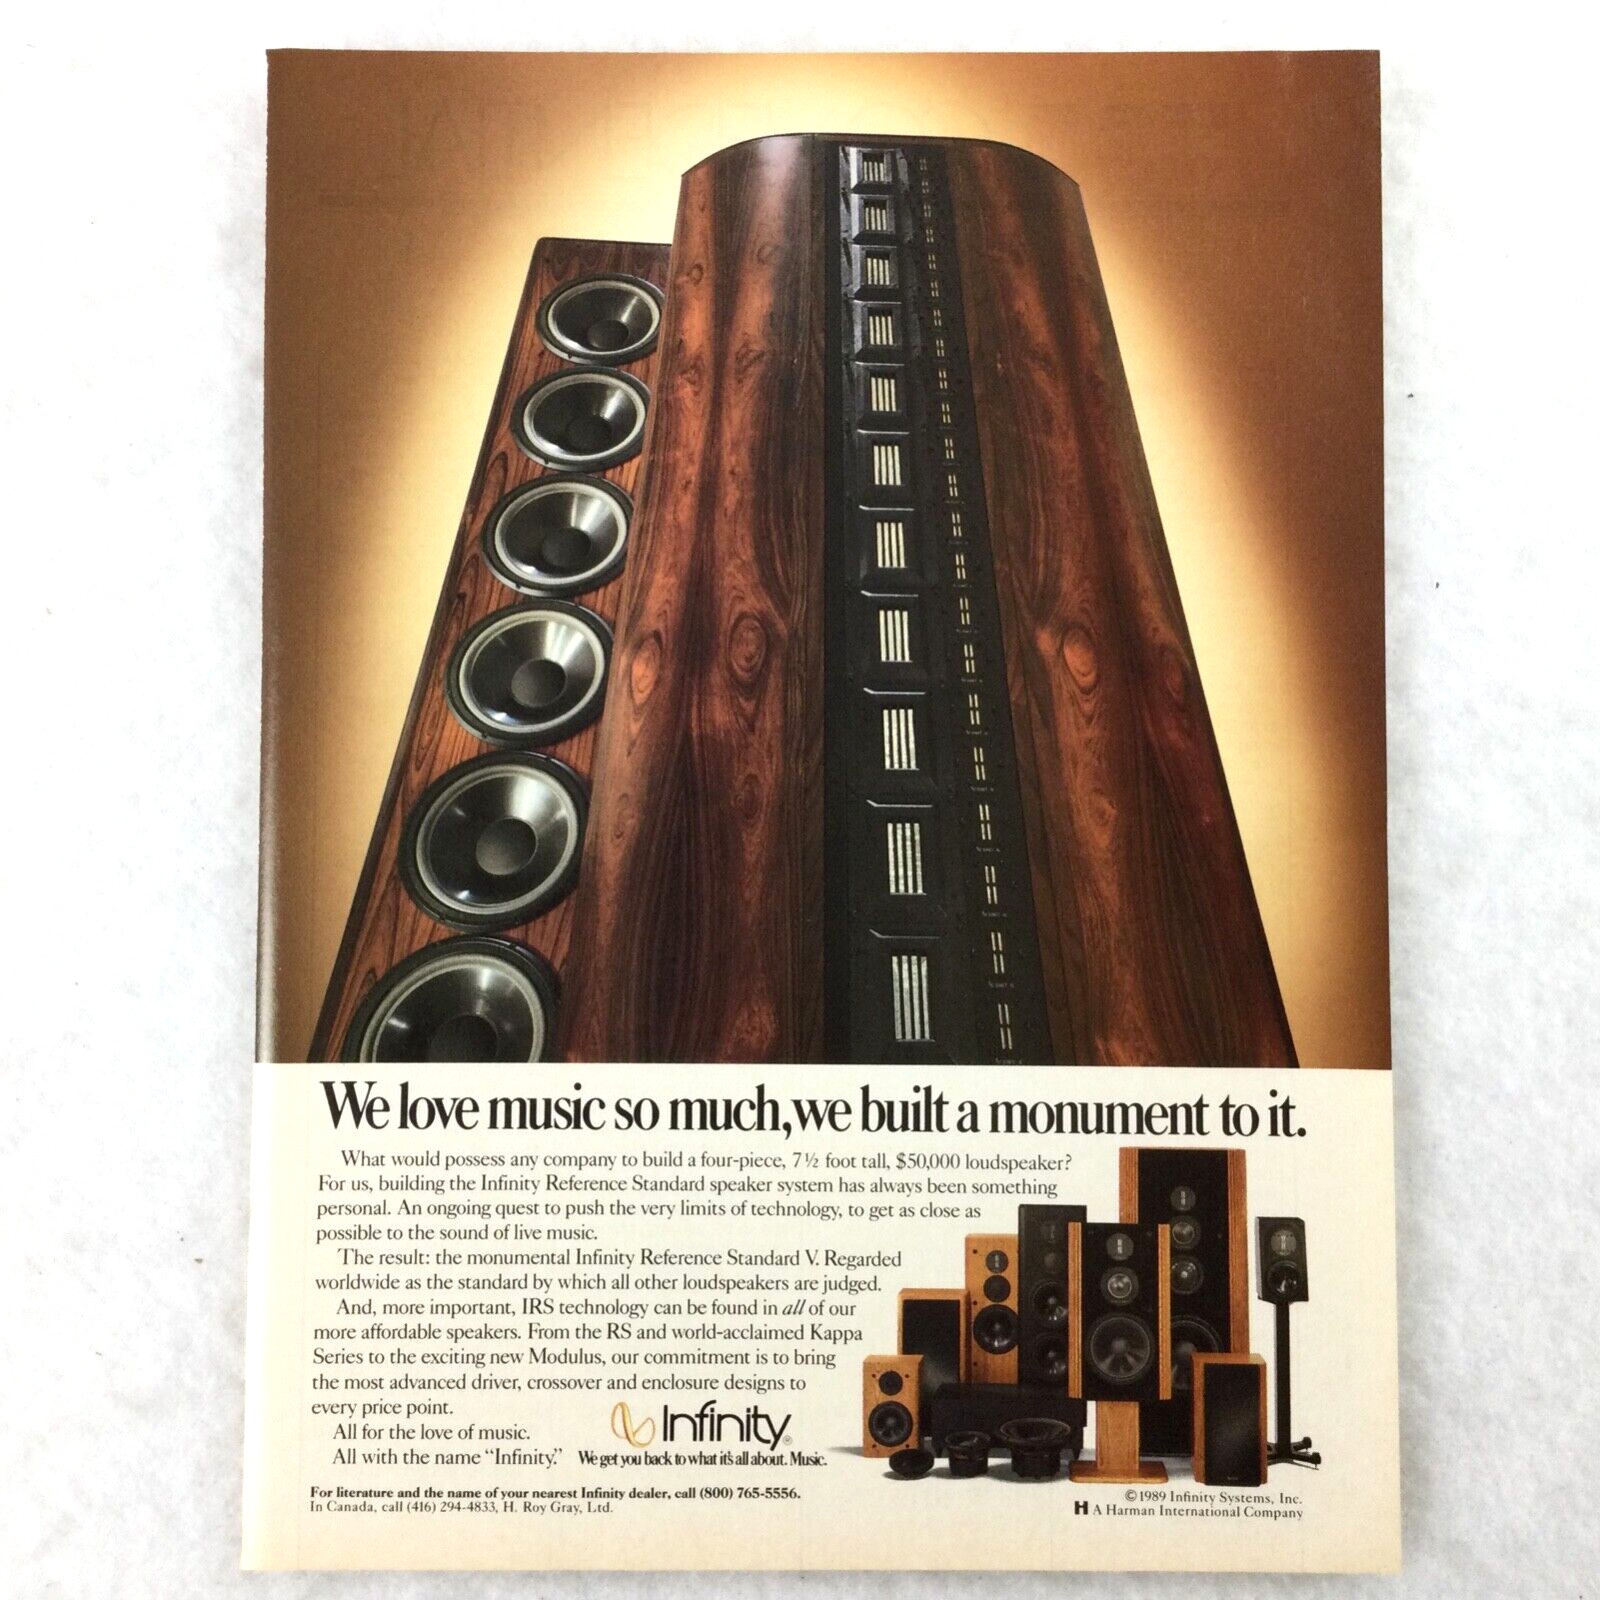 1989 Infinity Stereo Speakers VINTAGE 80s PRINT AD We Built A Monument To It